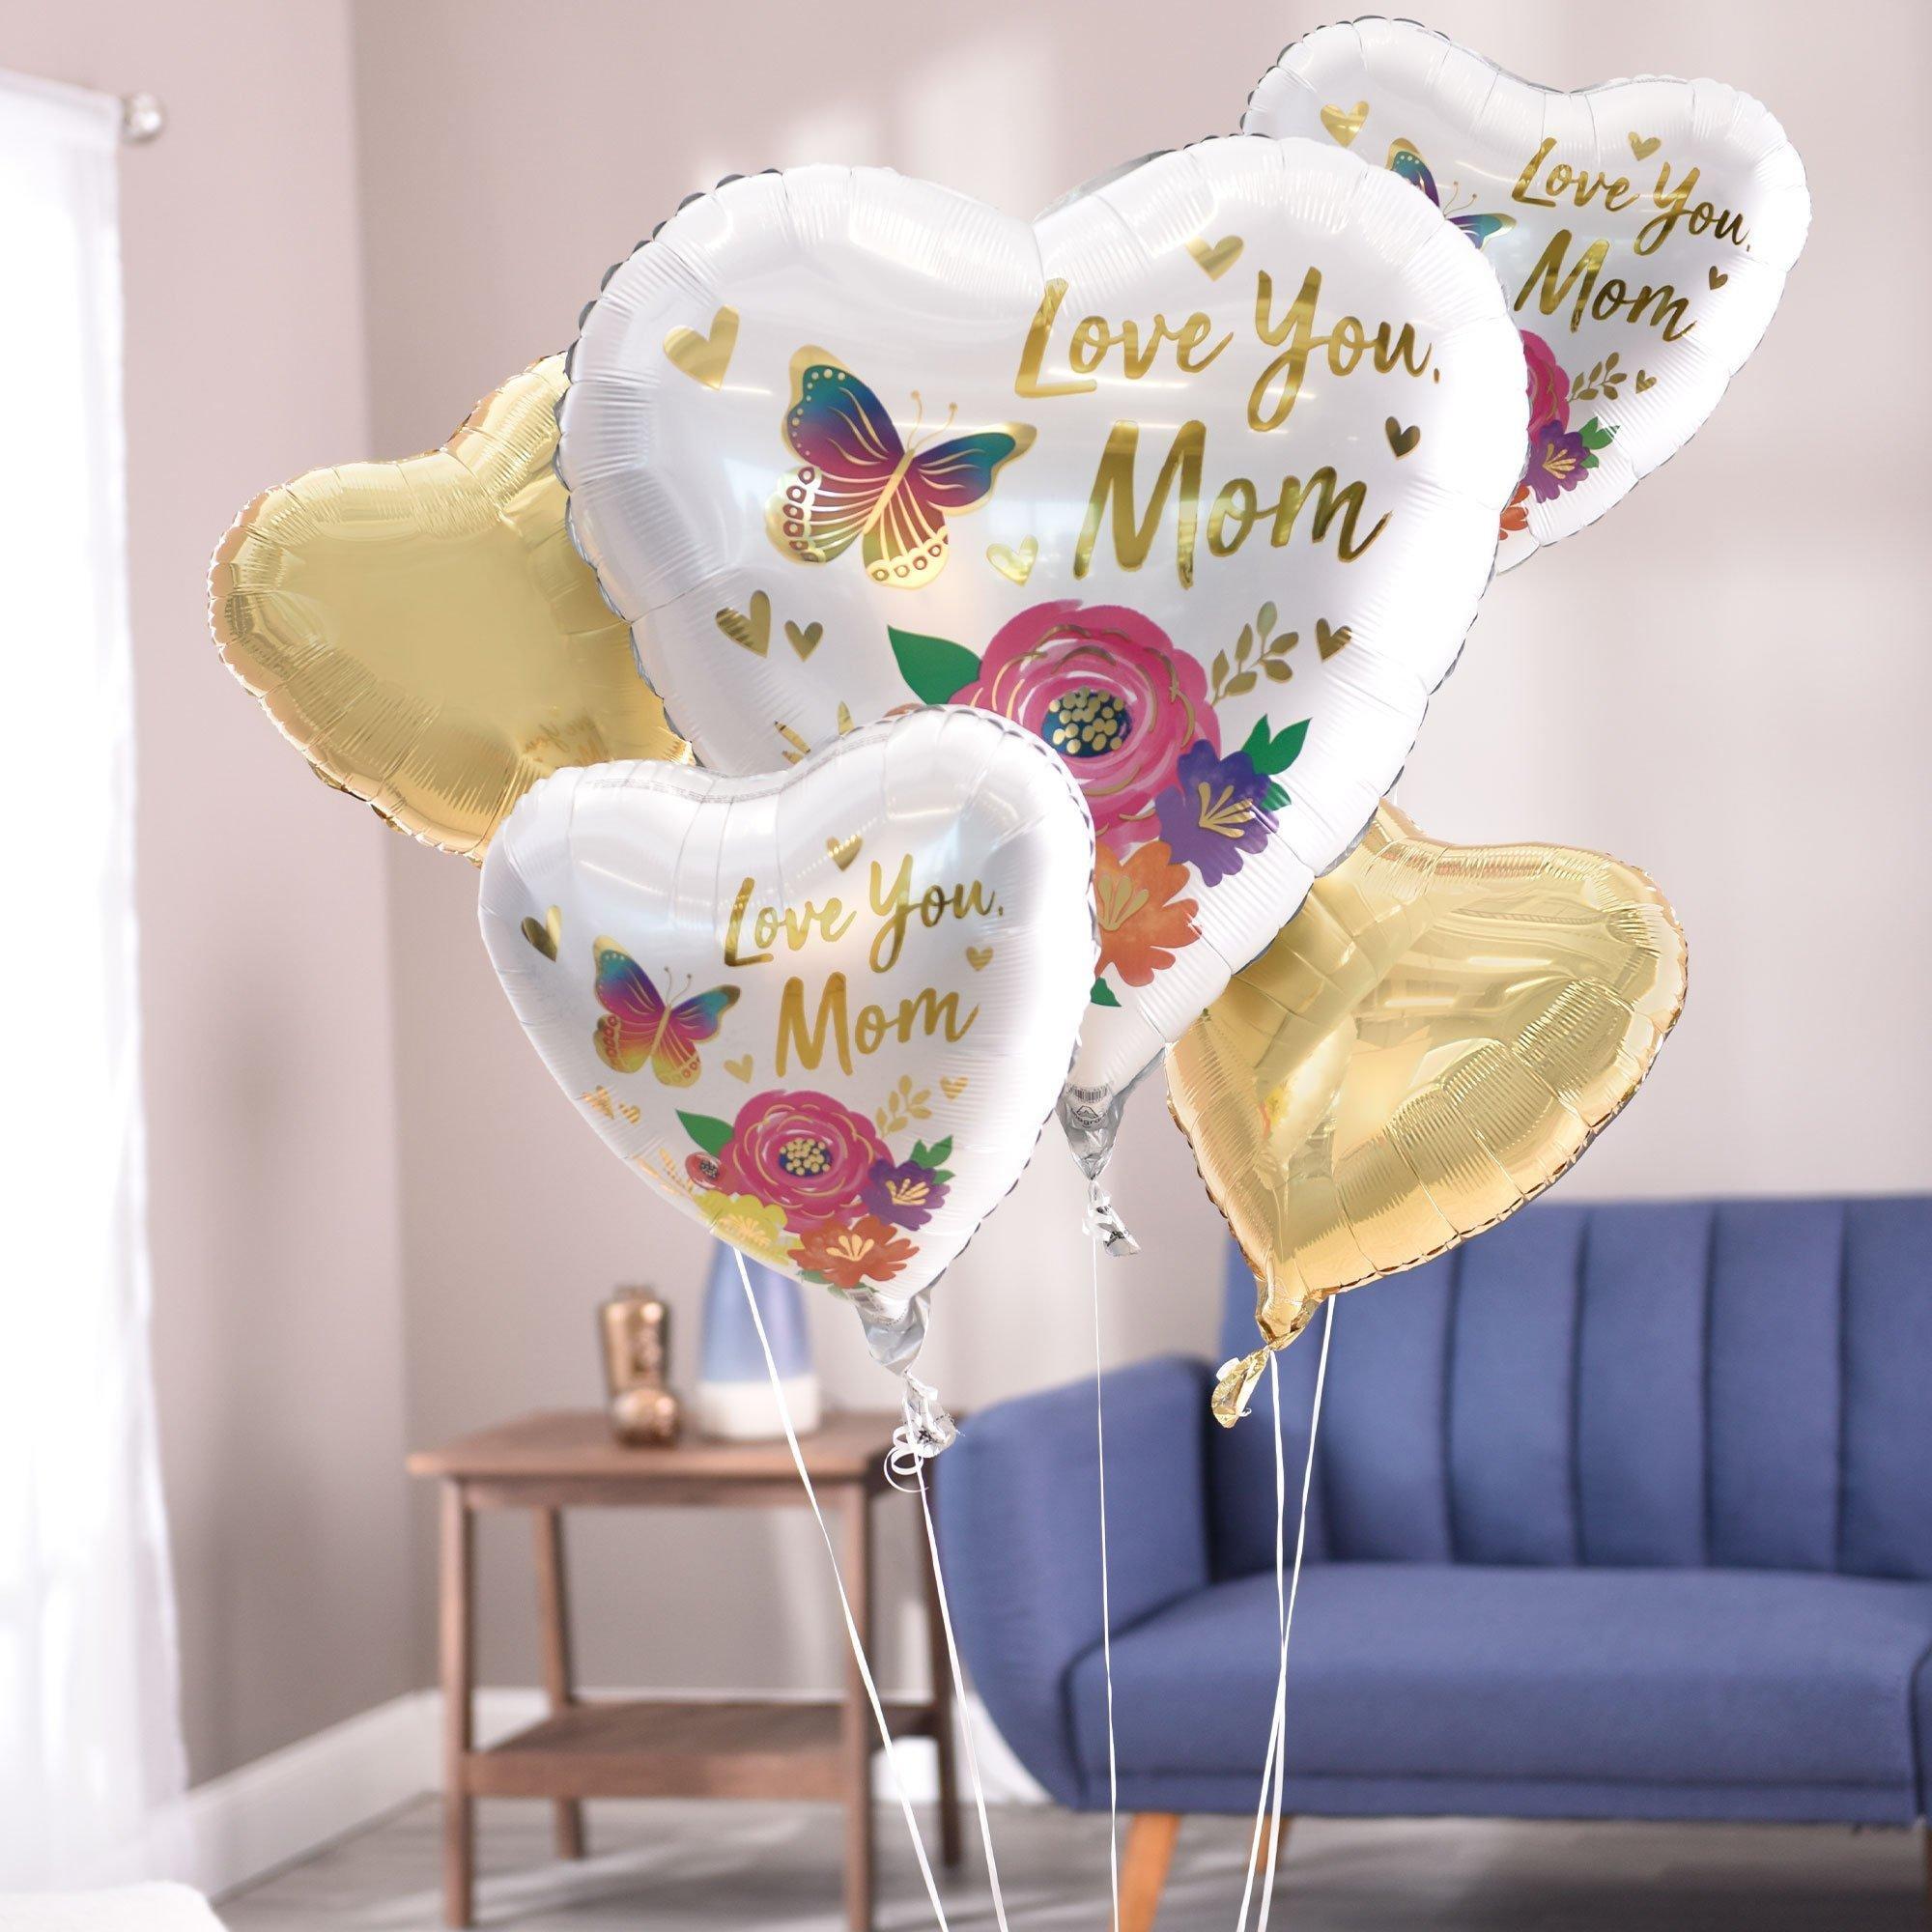 Birthday For a Queen Balloon Bouquet — Inflated Expressions, LLC